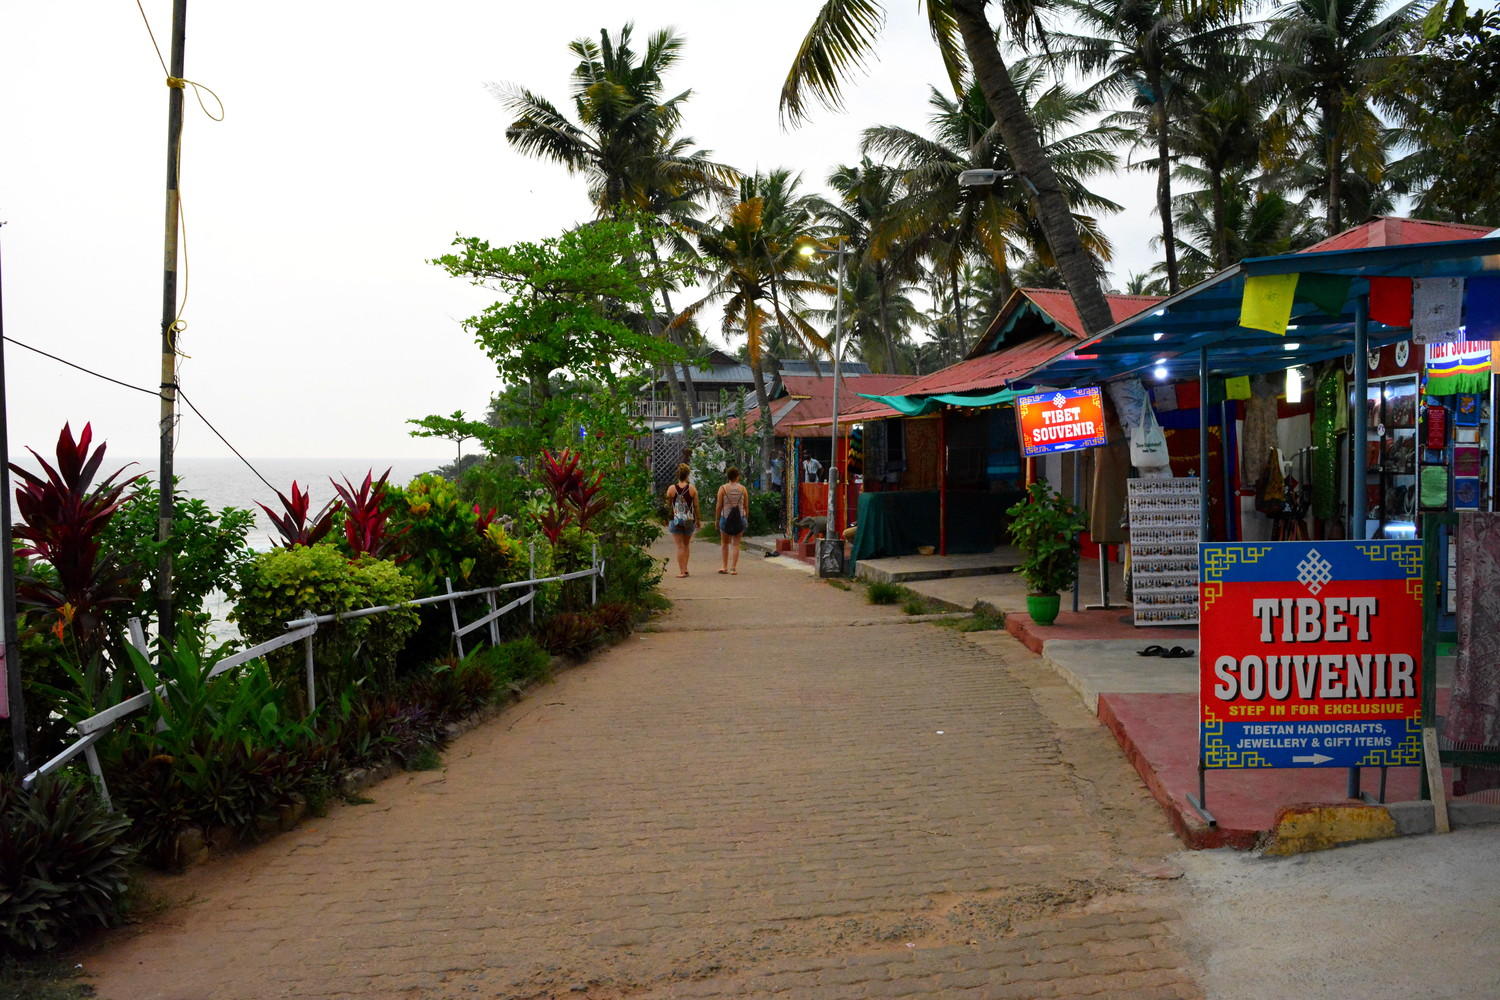 A promenade with souvenir shops and coconut palm trees along a cliff beside a sea